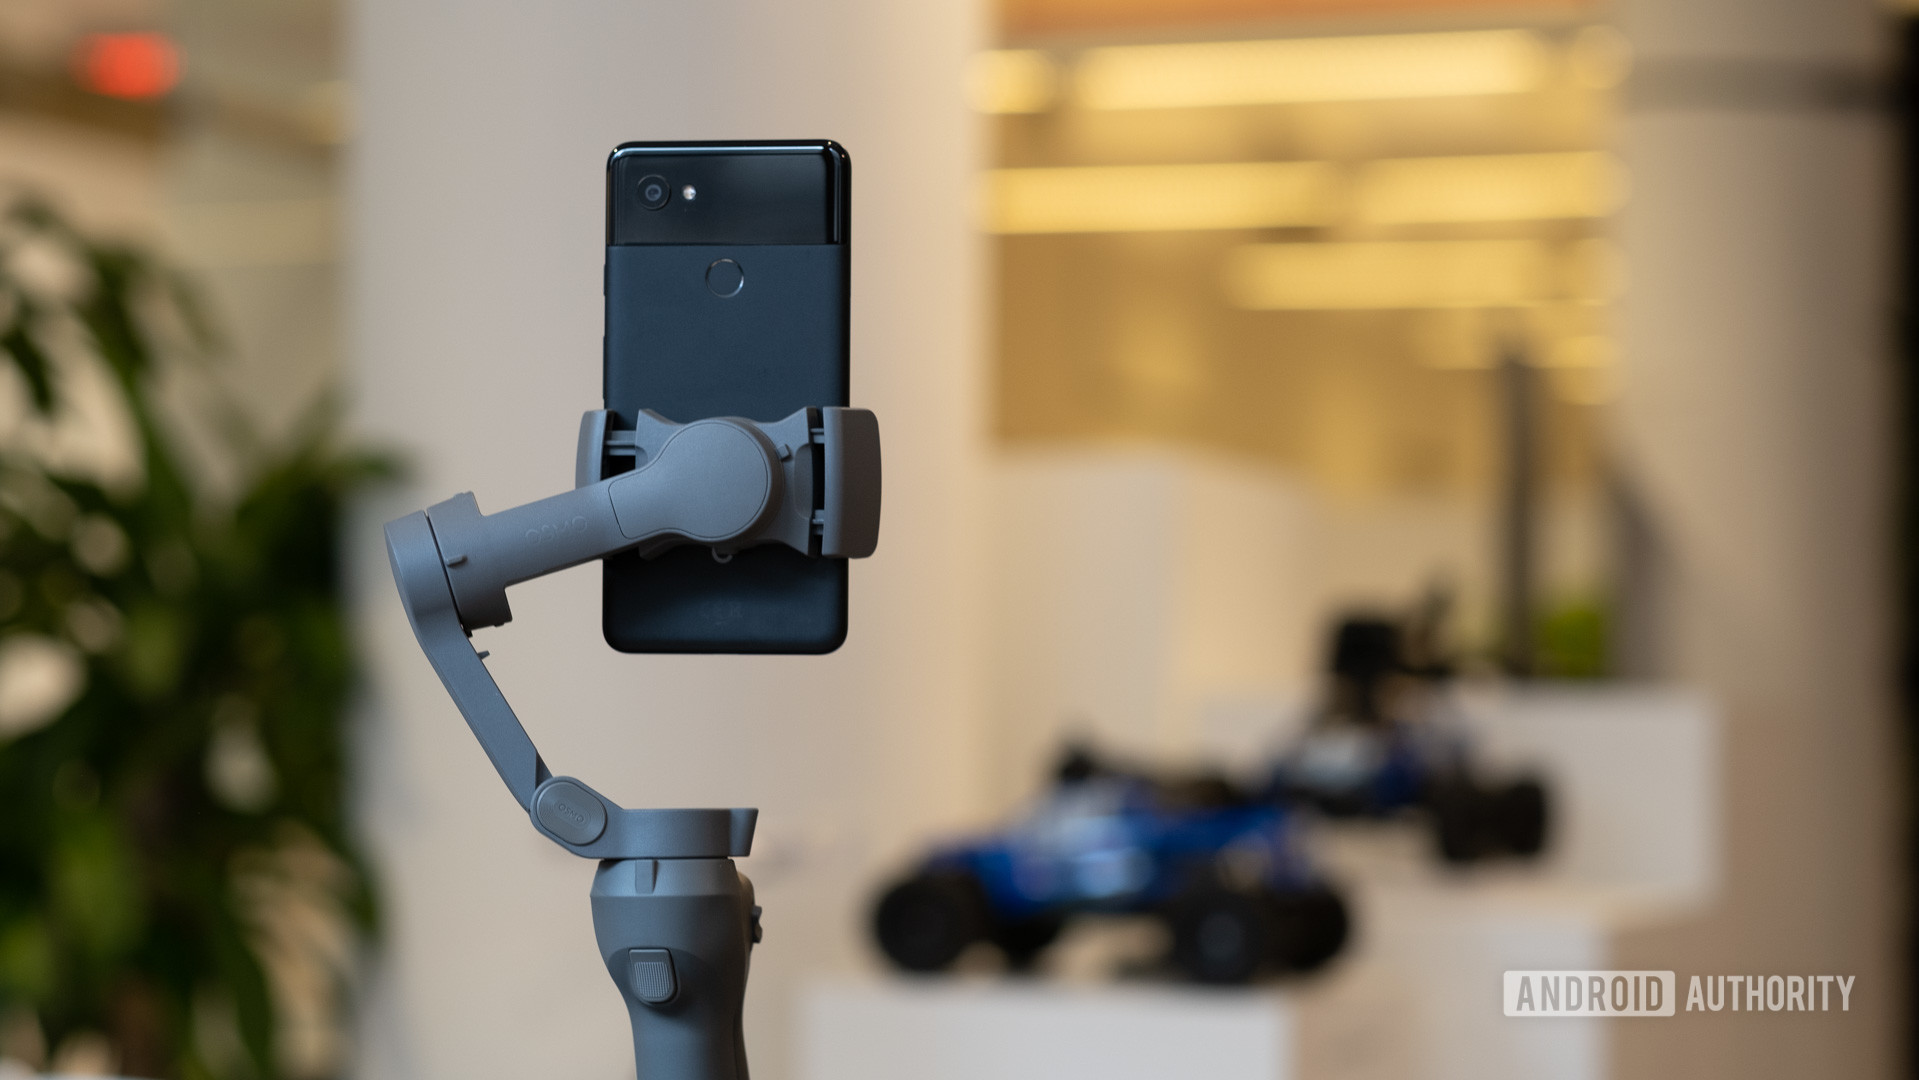 DJI Osmo Mobile 3 on table with Pixel closer